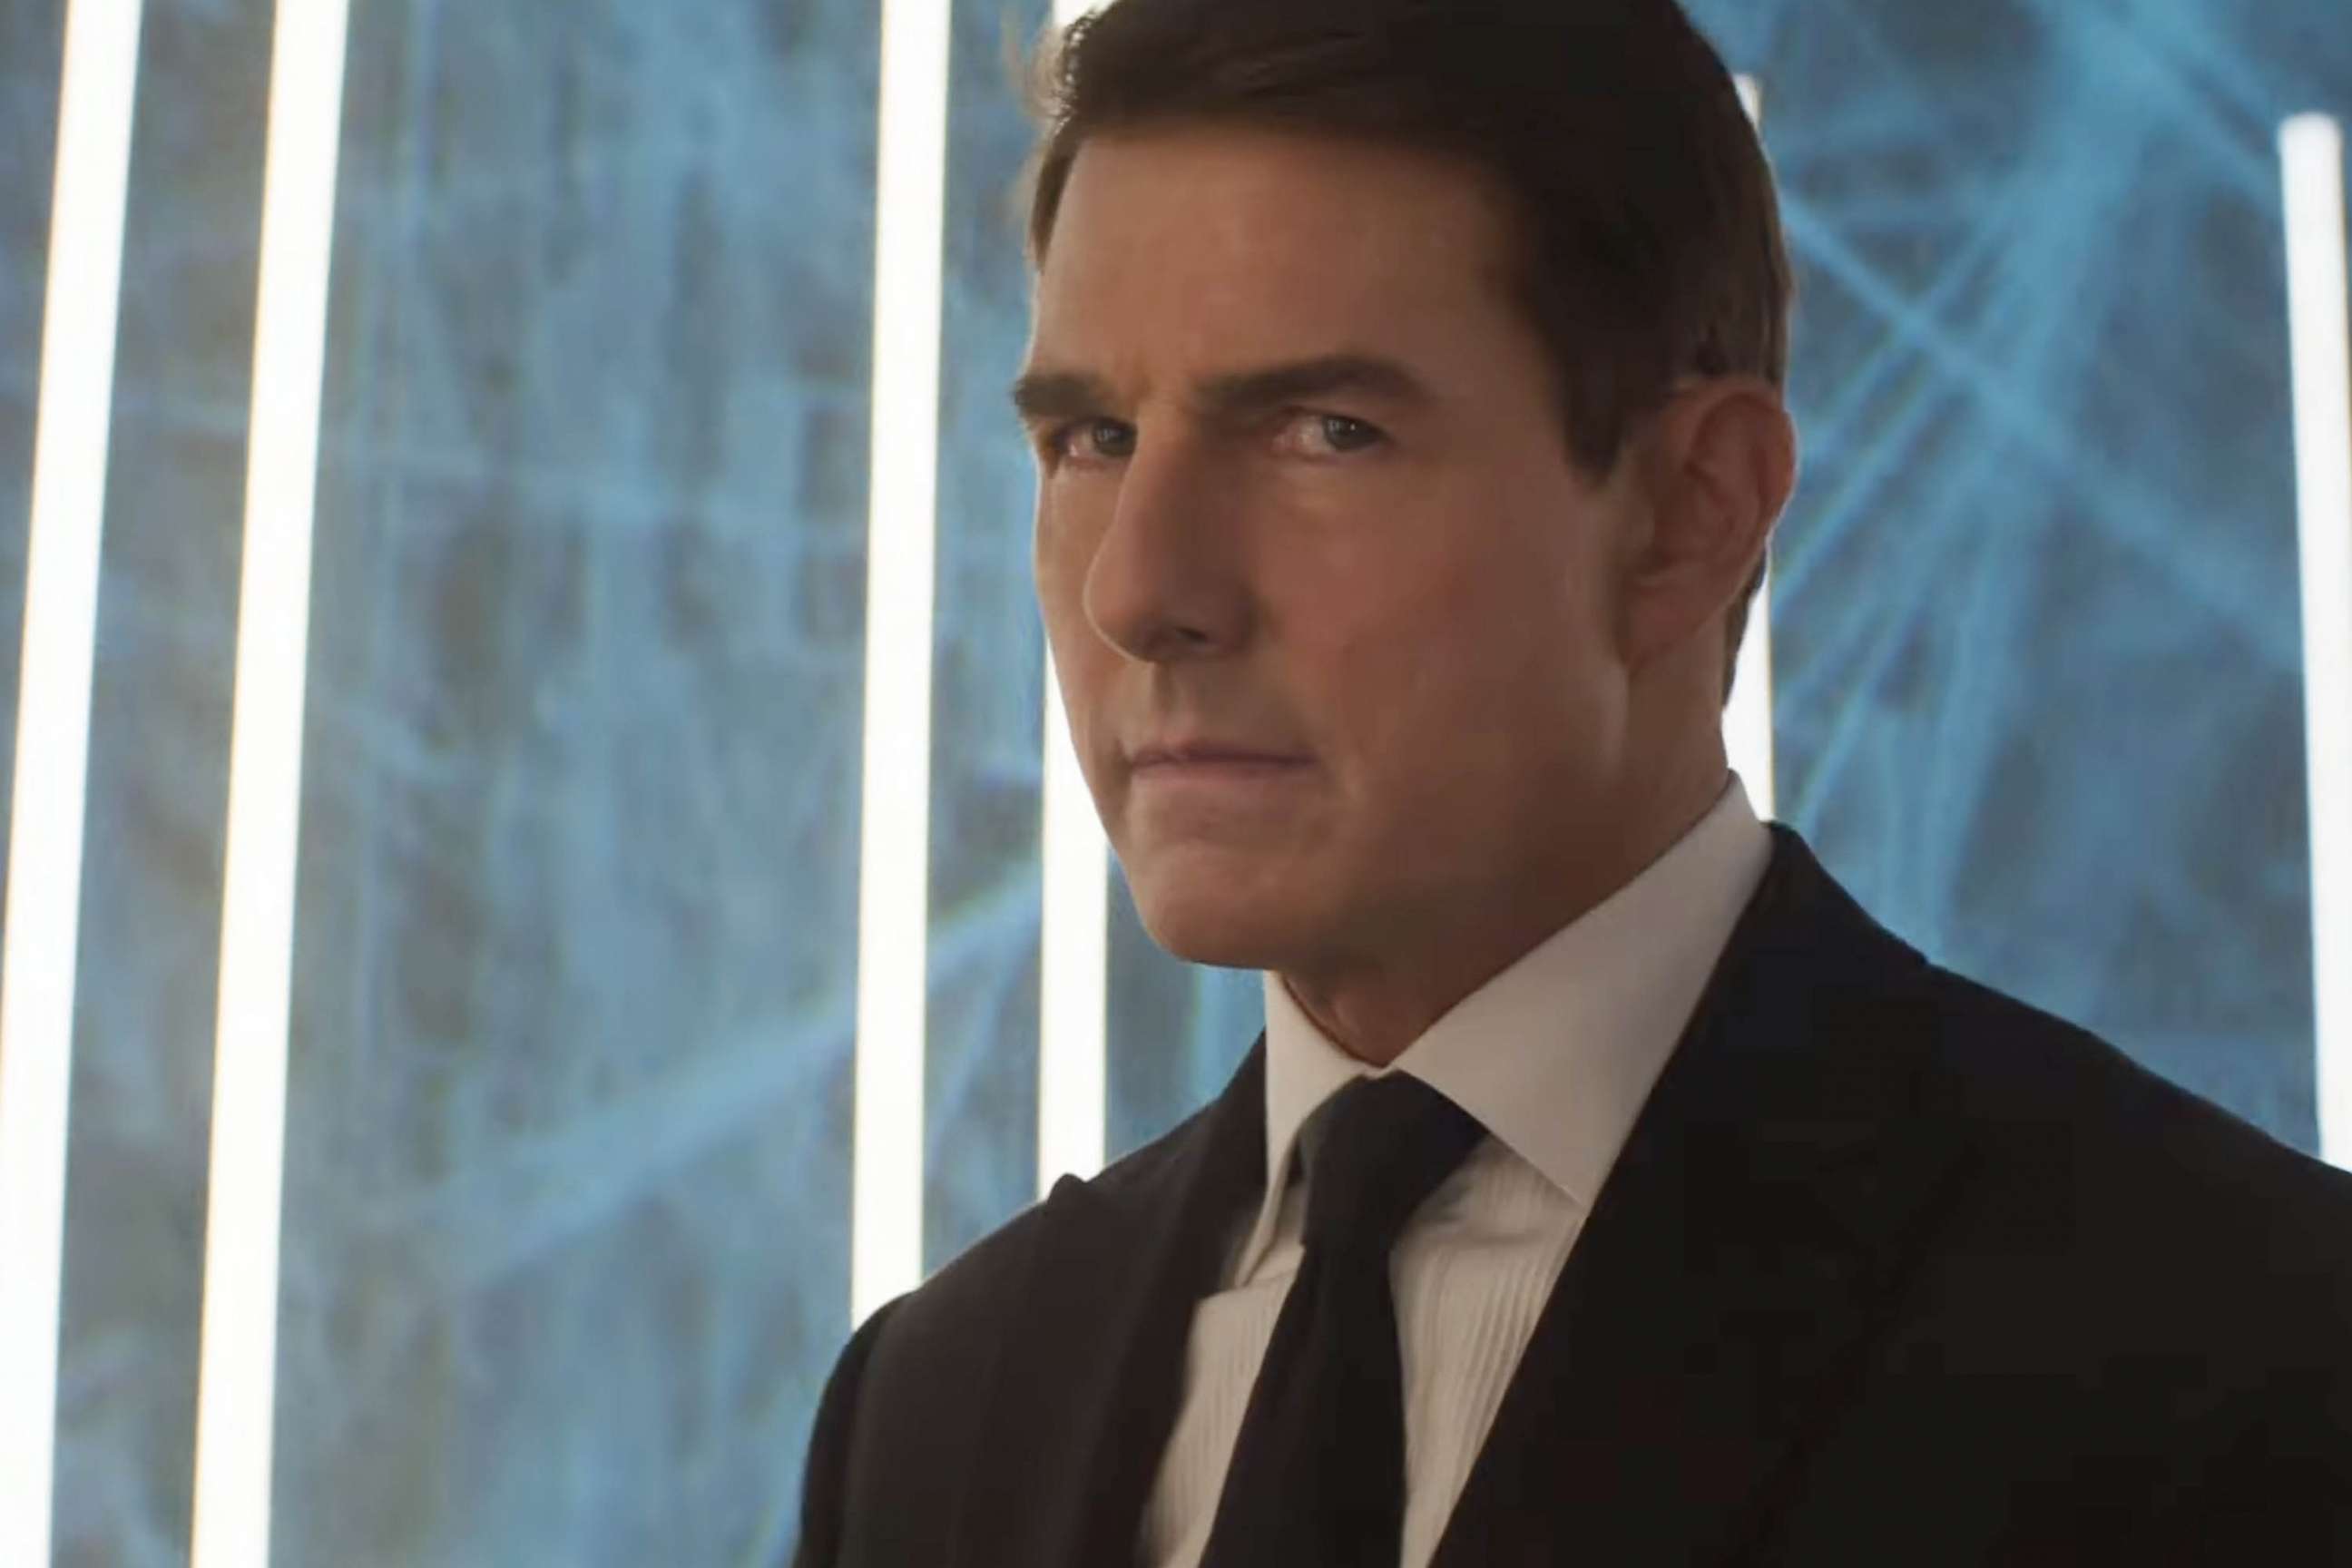 PHOTO: Tom Cruise in the new Mission Impossible trailer